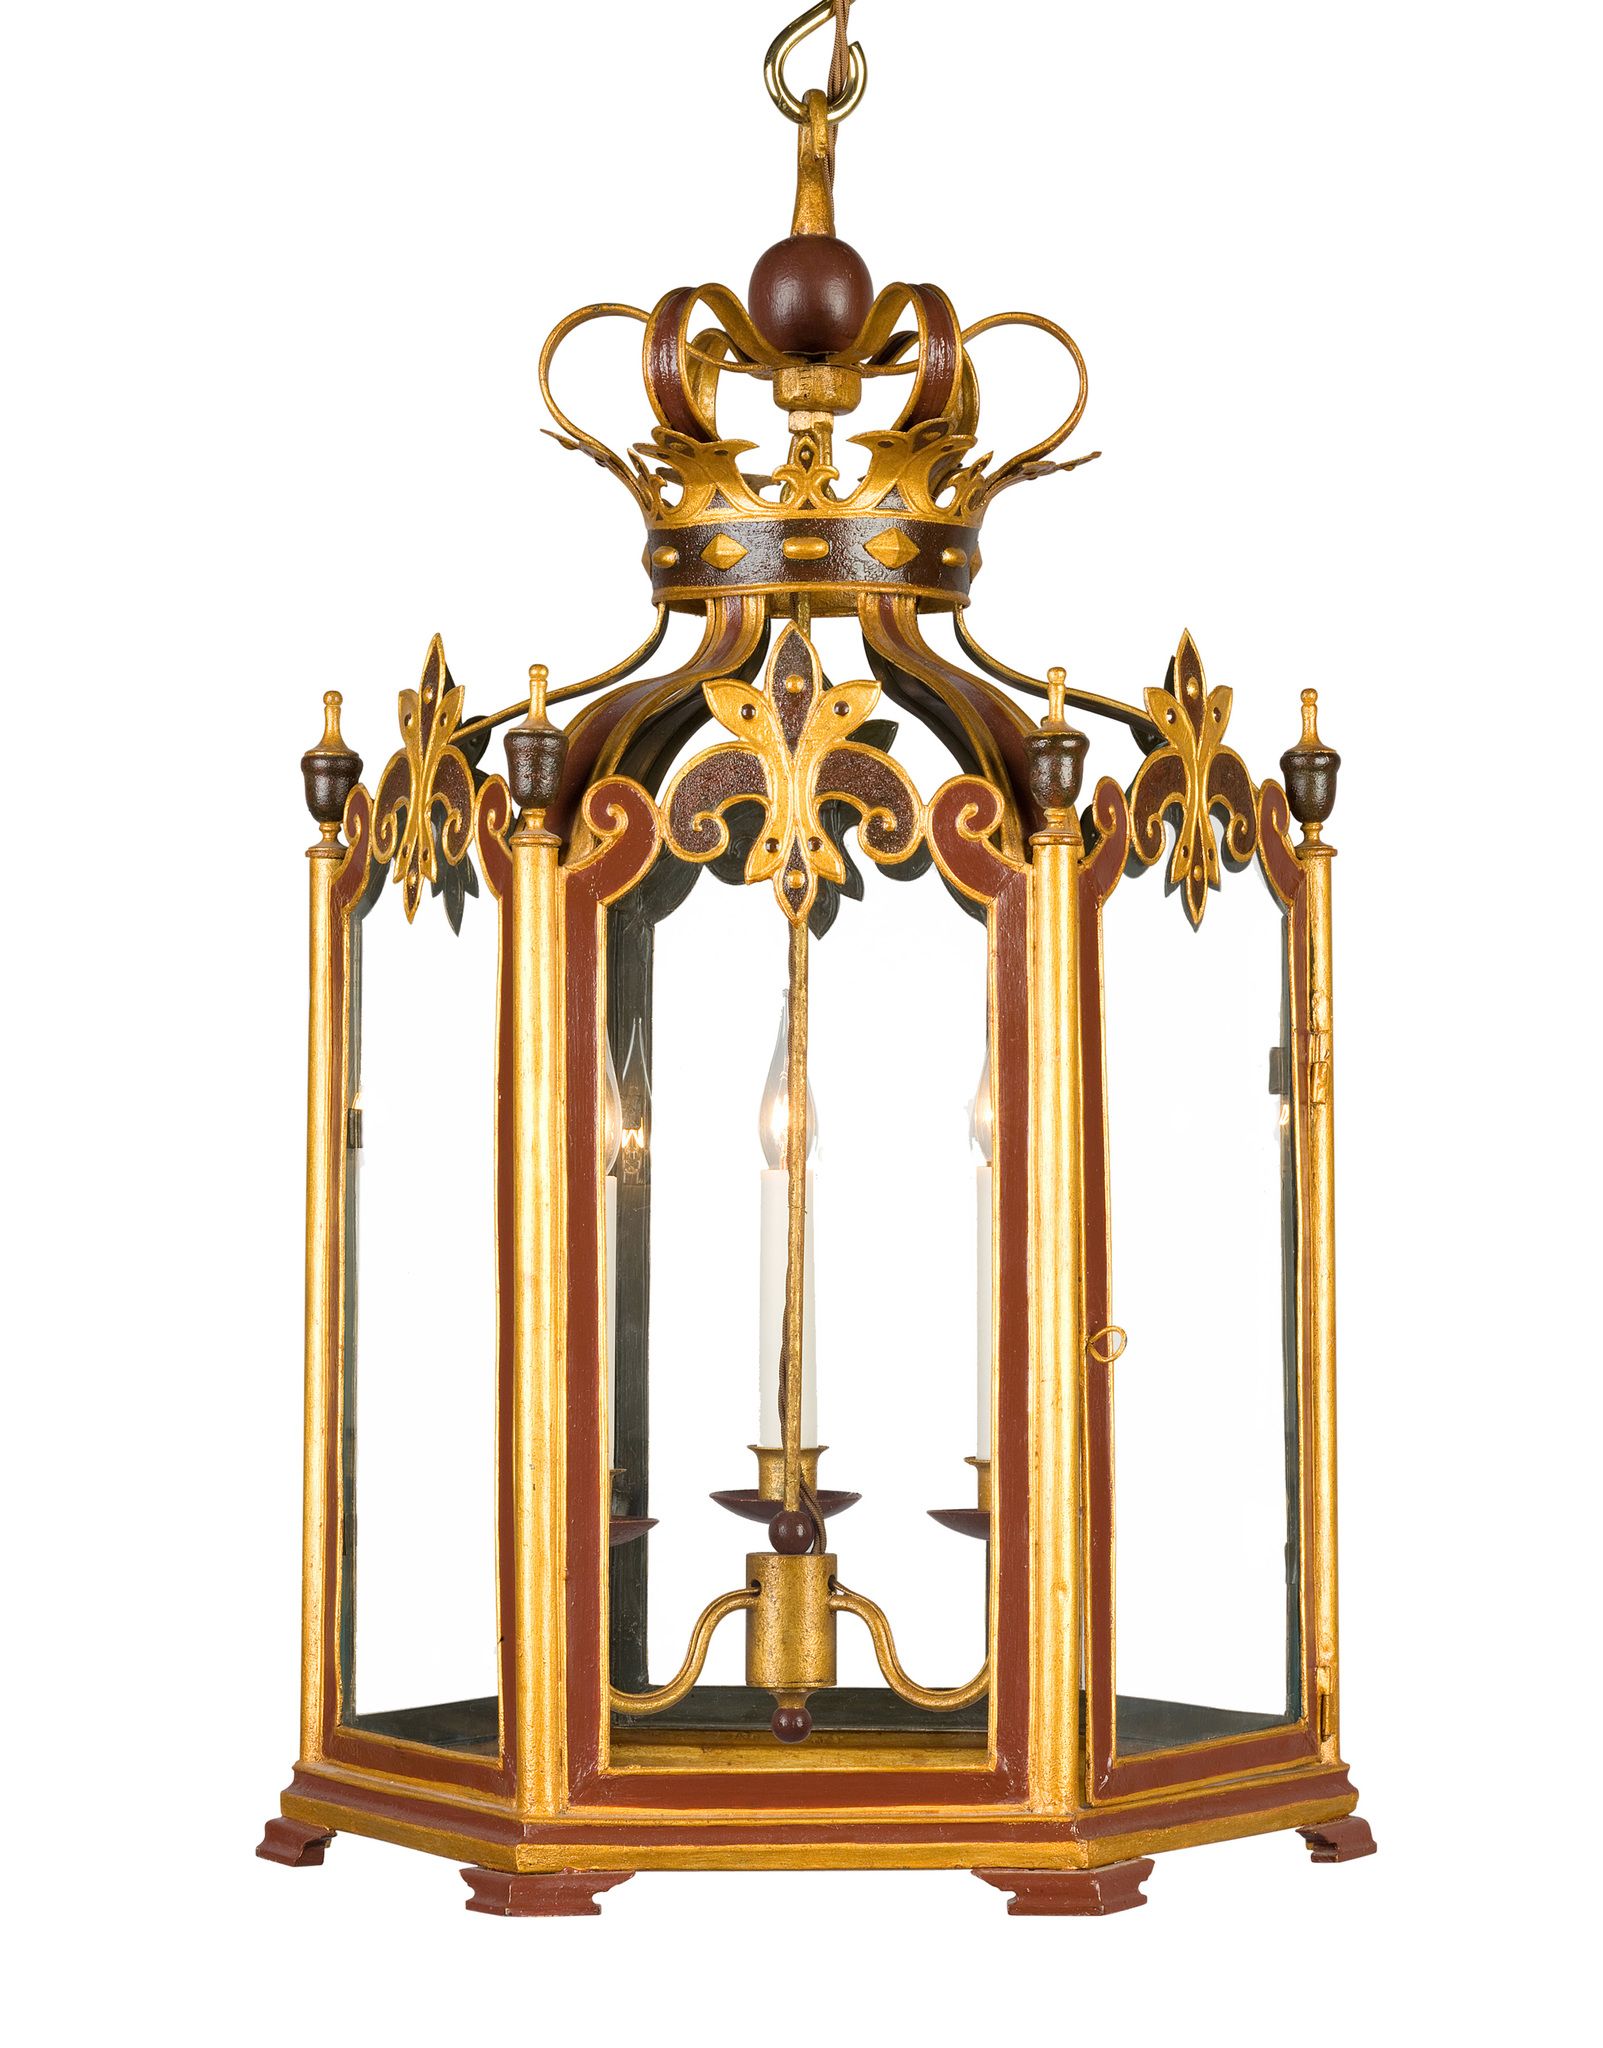 A Late 19th Century Hexagonal Tole Lantern France circa 1860, with a coronet canopy, the whole